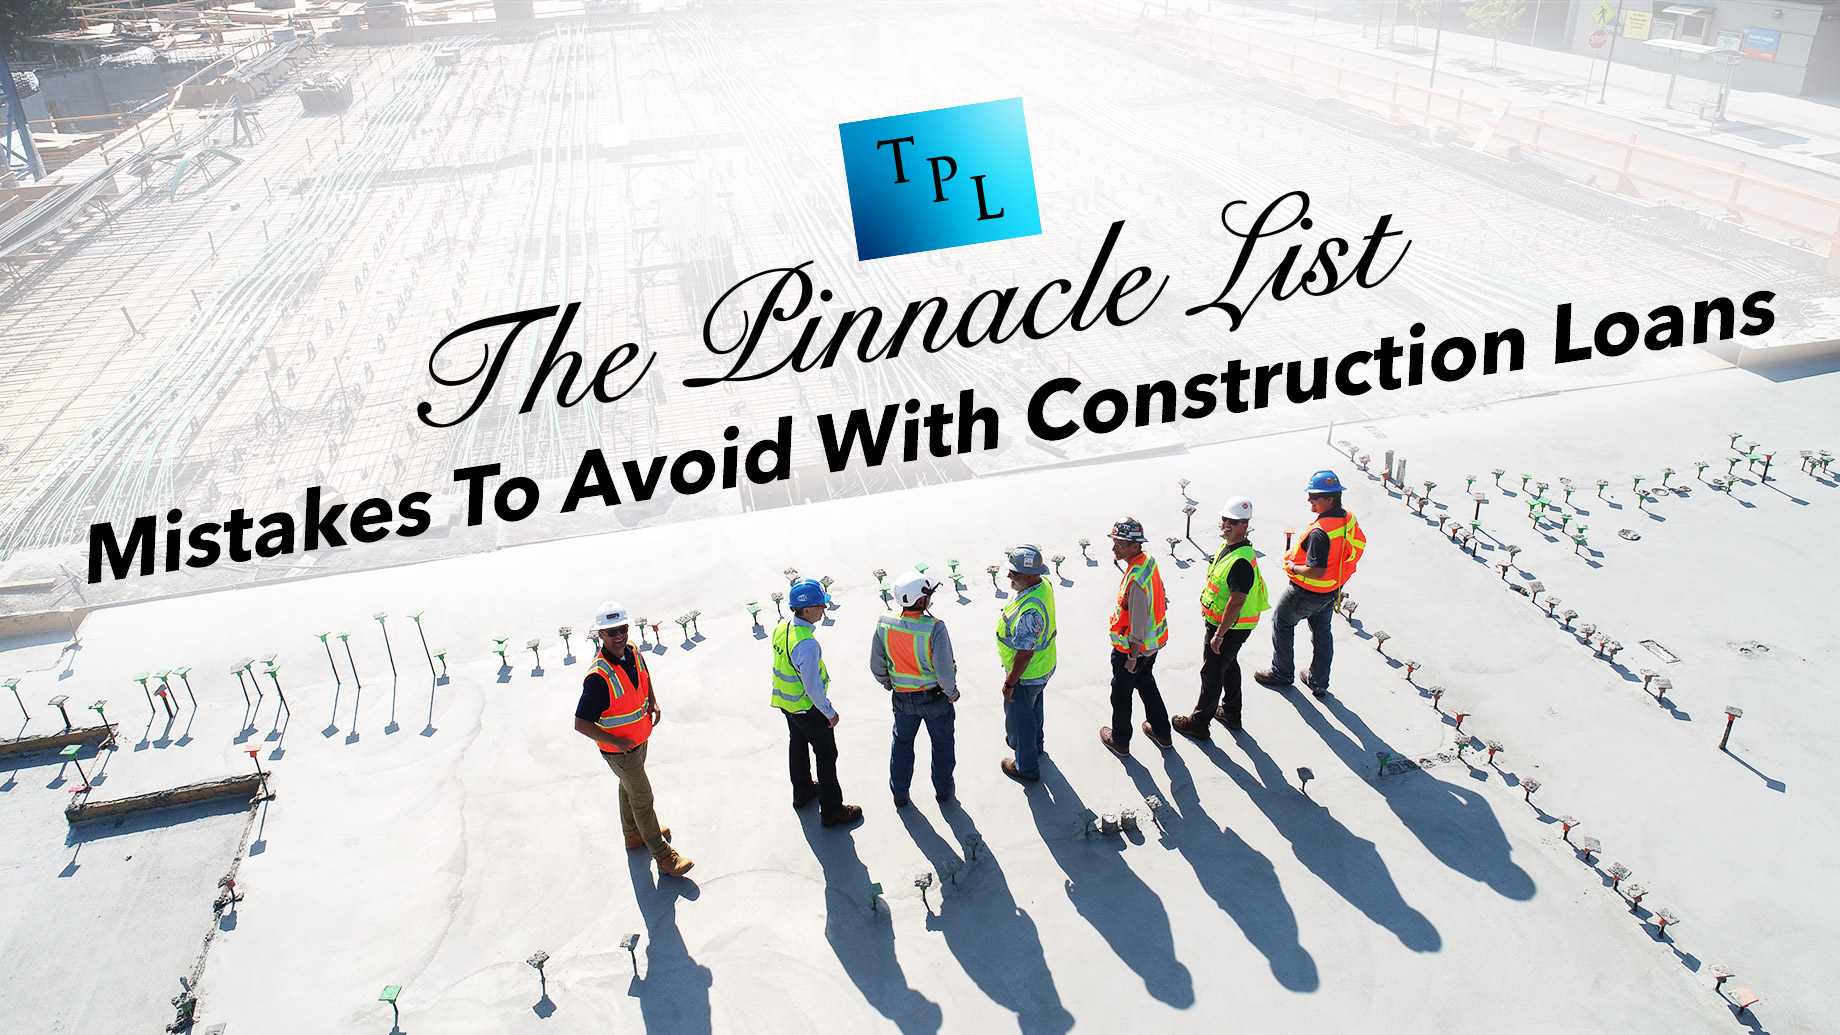 Mistakes To Avoid With Construction Loans